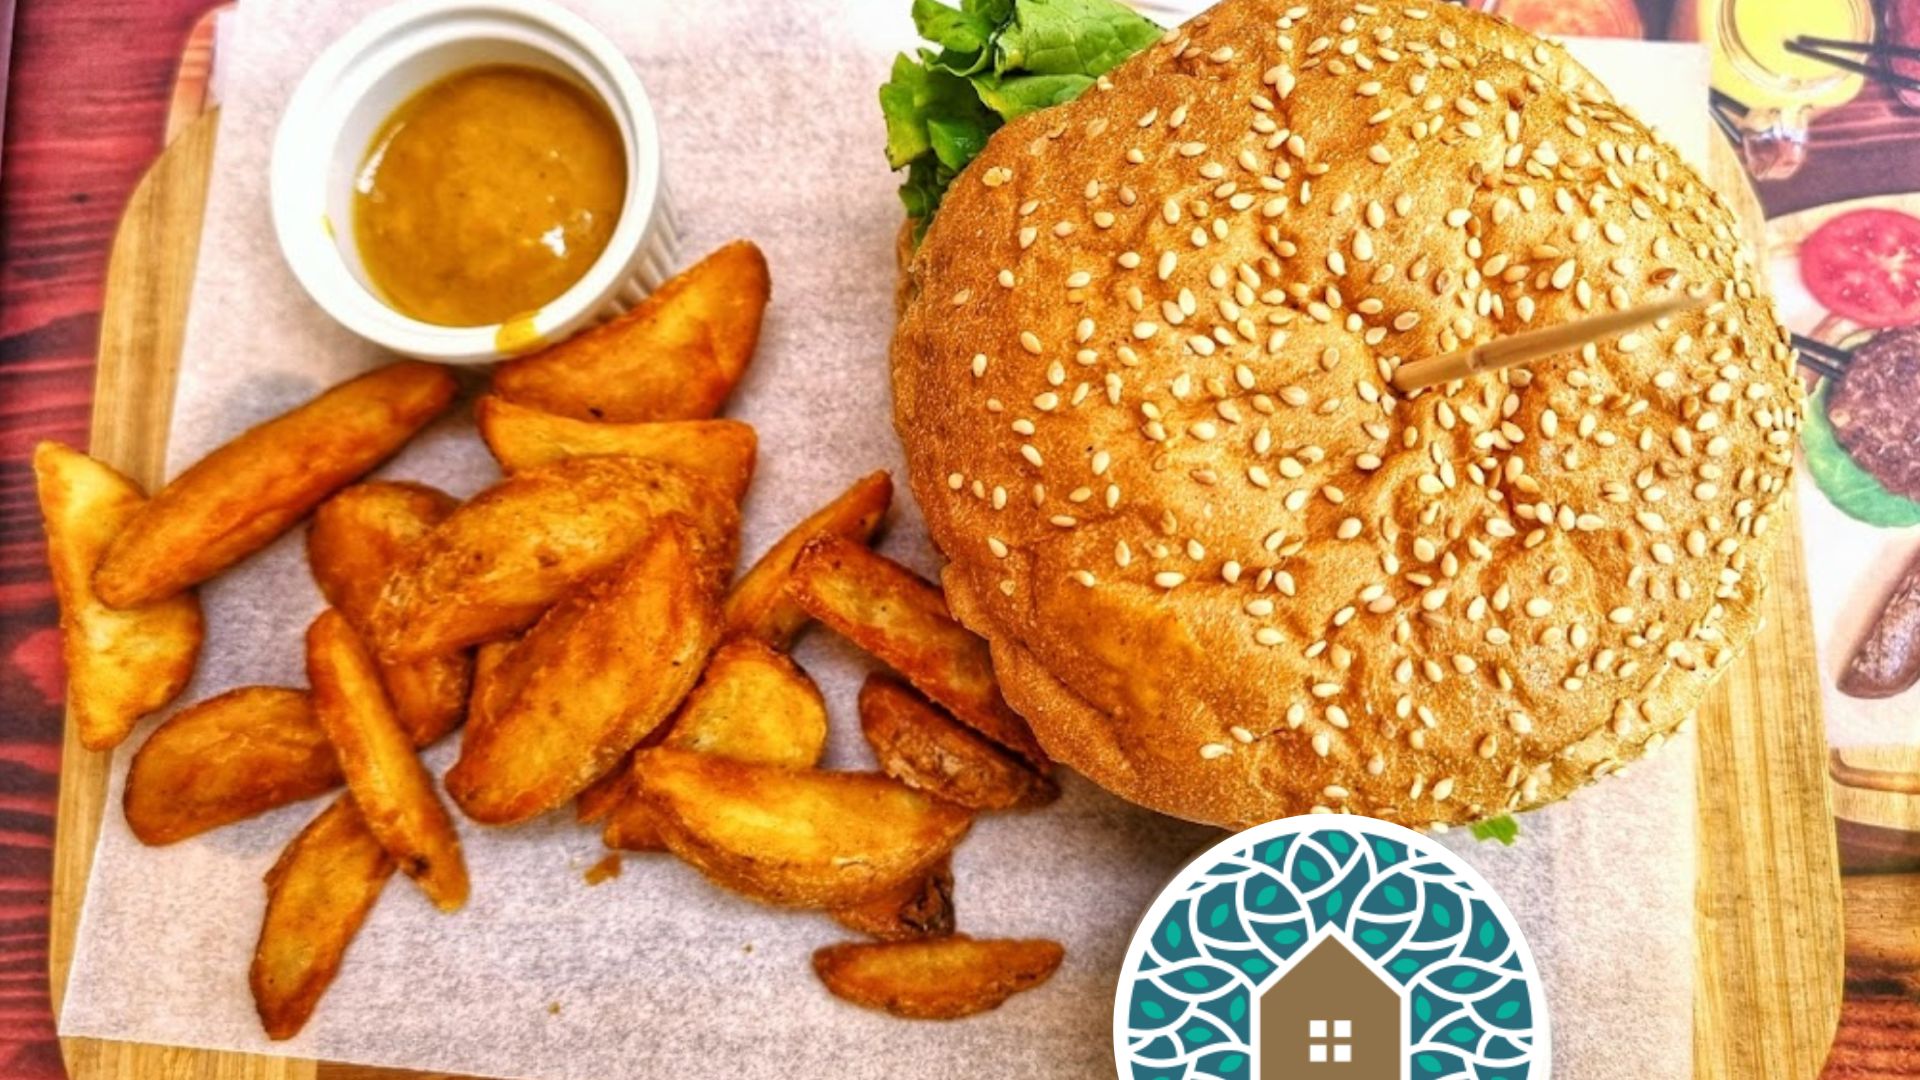 Vegan Burger made at our restaurant is a meal to be savoured